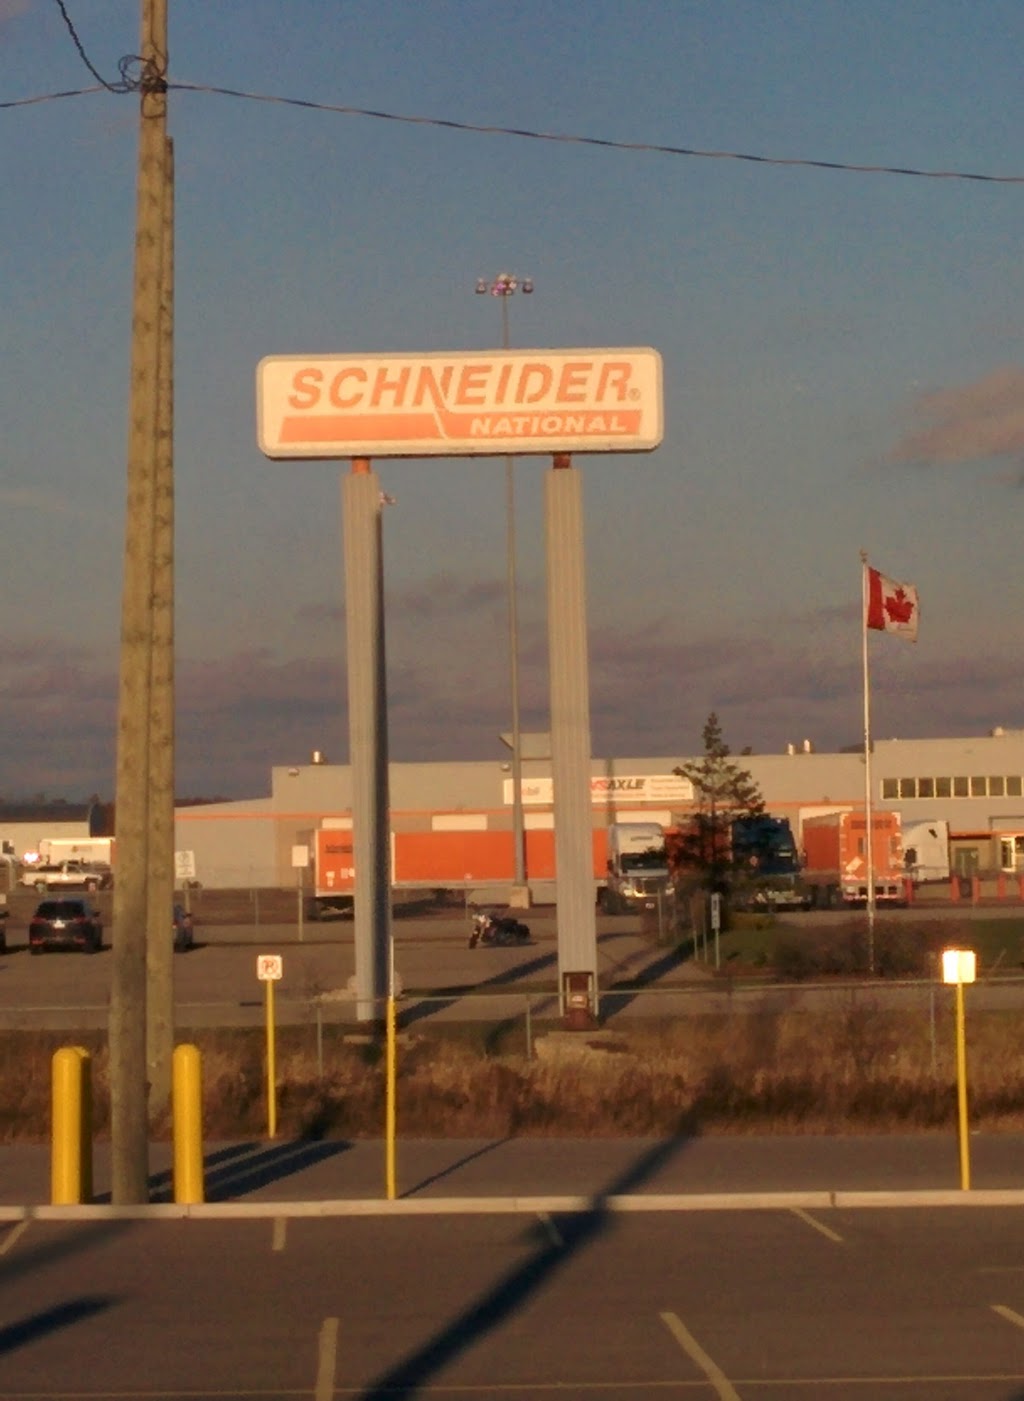 Schneider Operating/Training Center - Guelph | 7475 McLean Rd, Guelph, ON N1H 6H9, Canada | Phone: (800) 447-7433